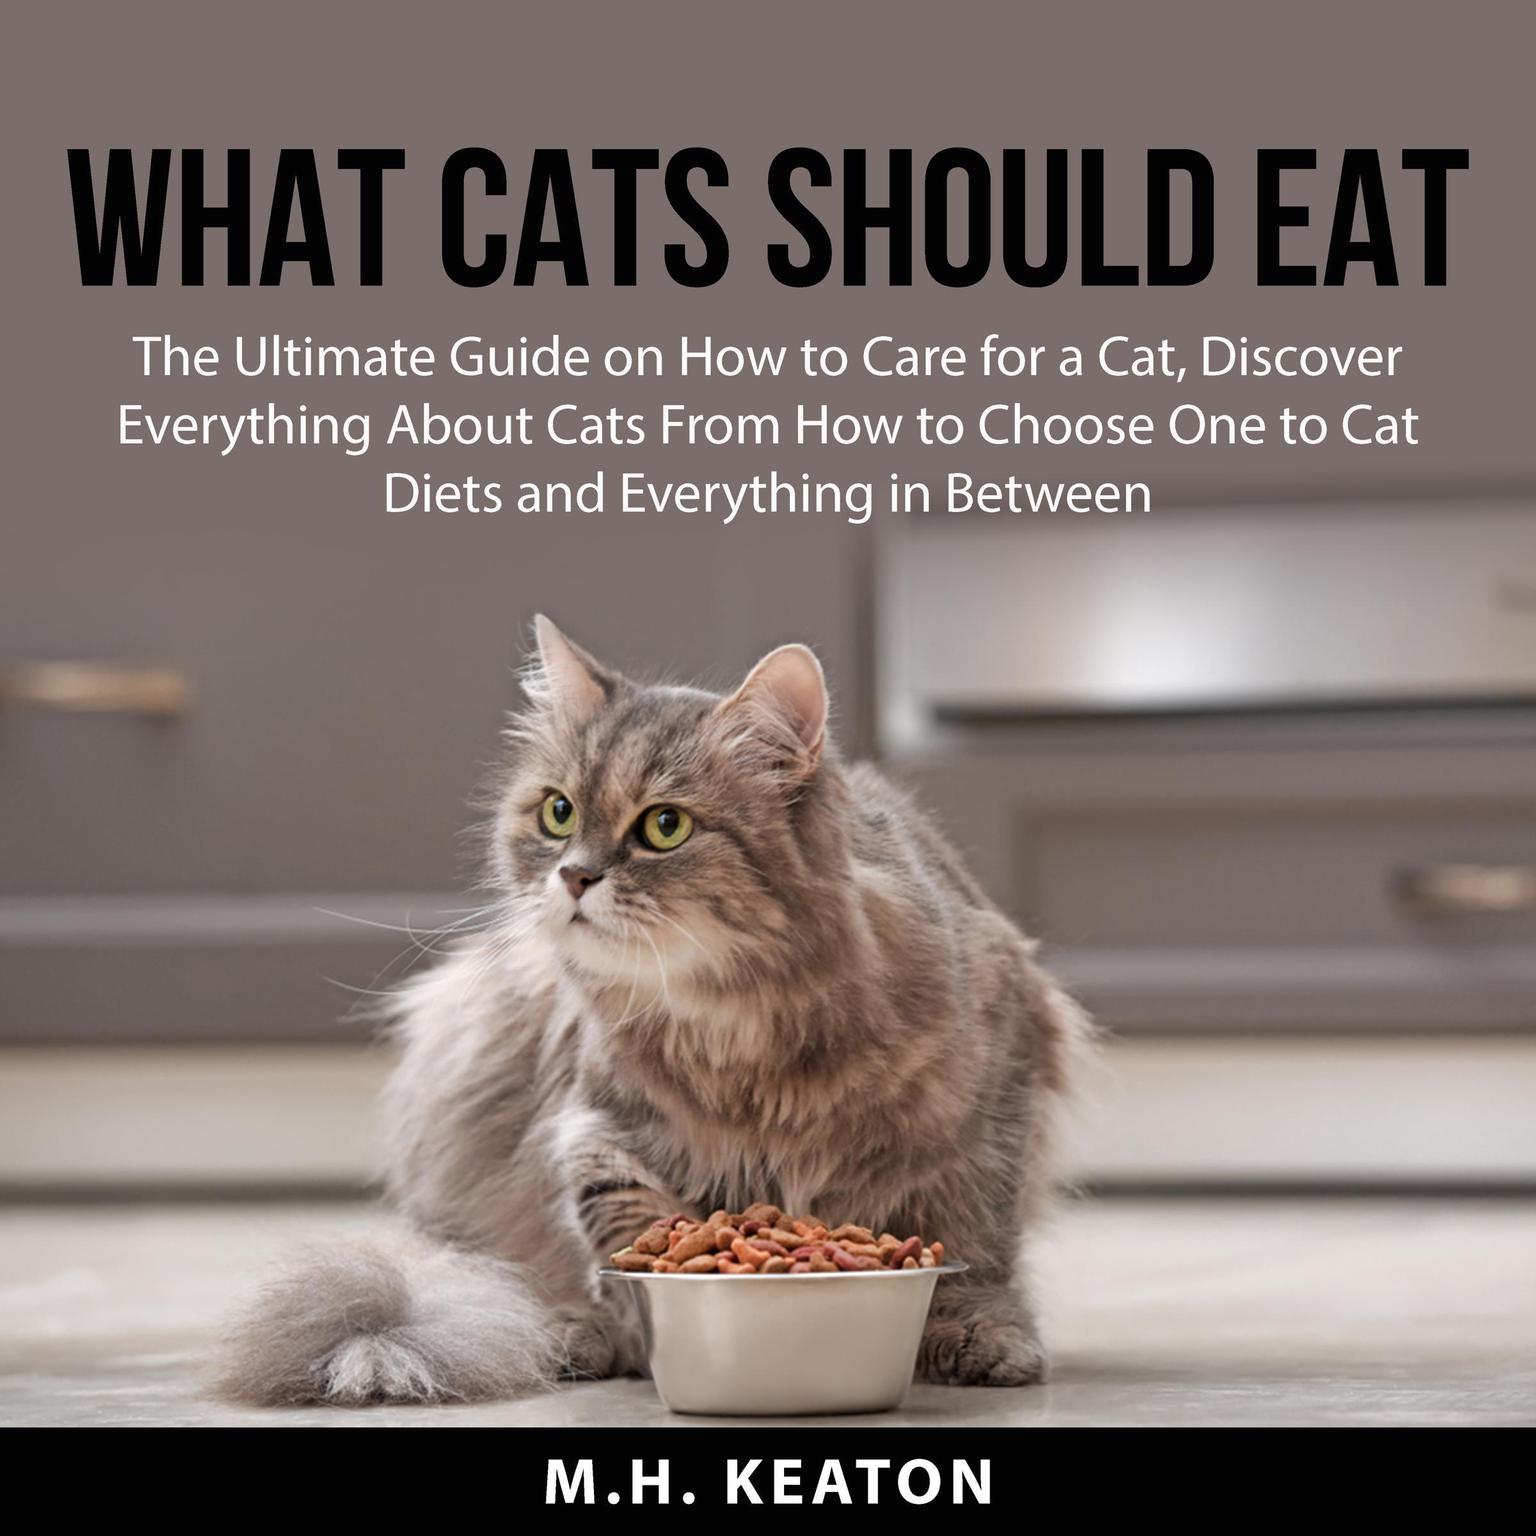 What Cats Should Eat: The Ultimate Guide on How to Care for a Cat, Discover Everything About Cats From How to Choose One to Cat Diets and Everything in Between Audiobook, by M.H. Keaton